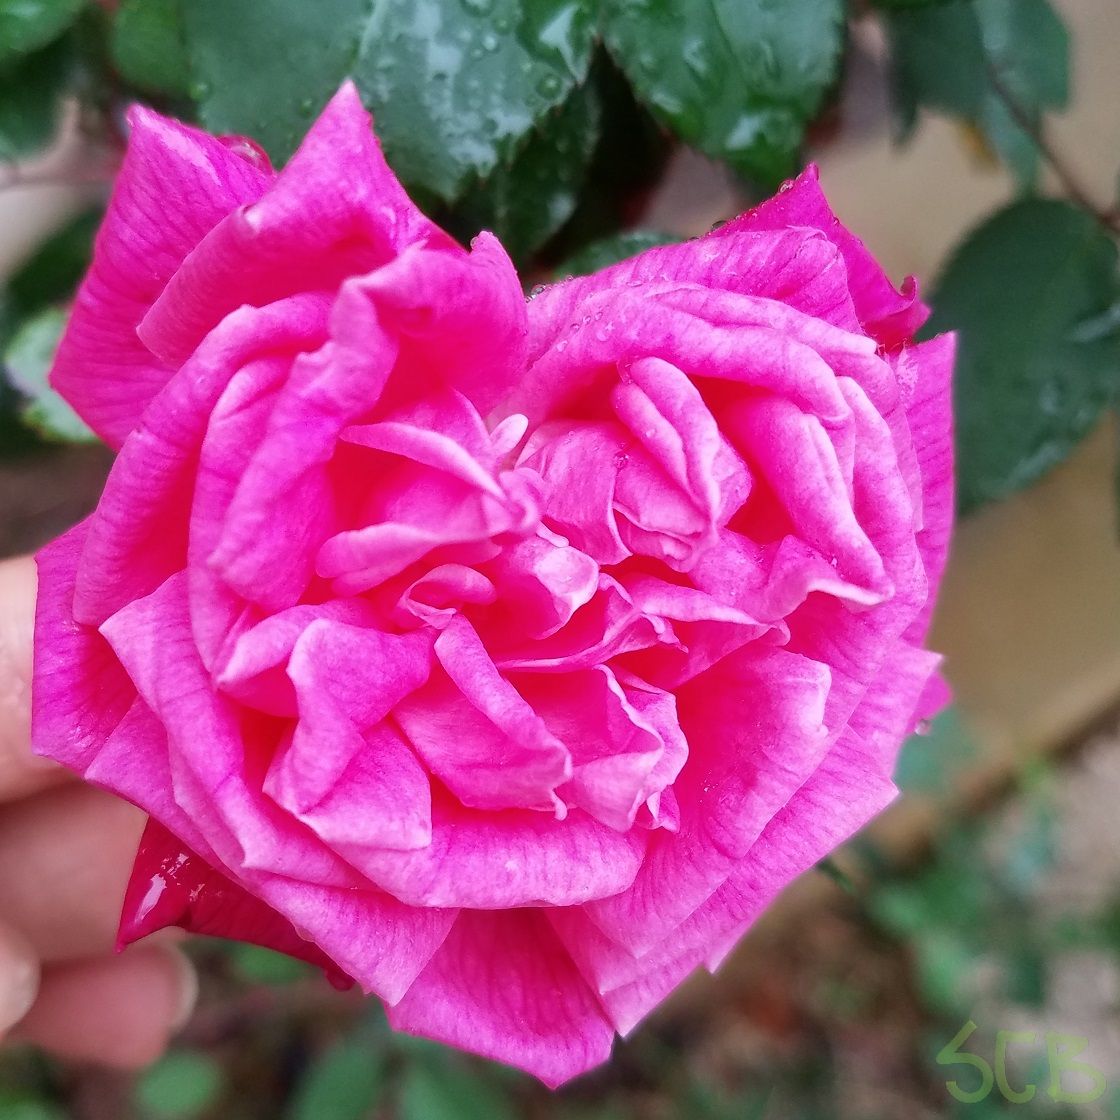 steemit-enternamehere-poetry-verse_therapy-session1-today-rose-pink.jpg